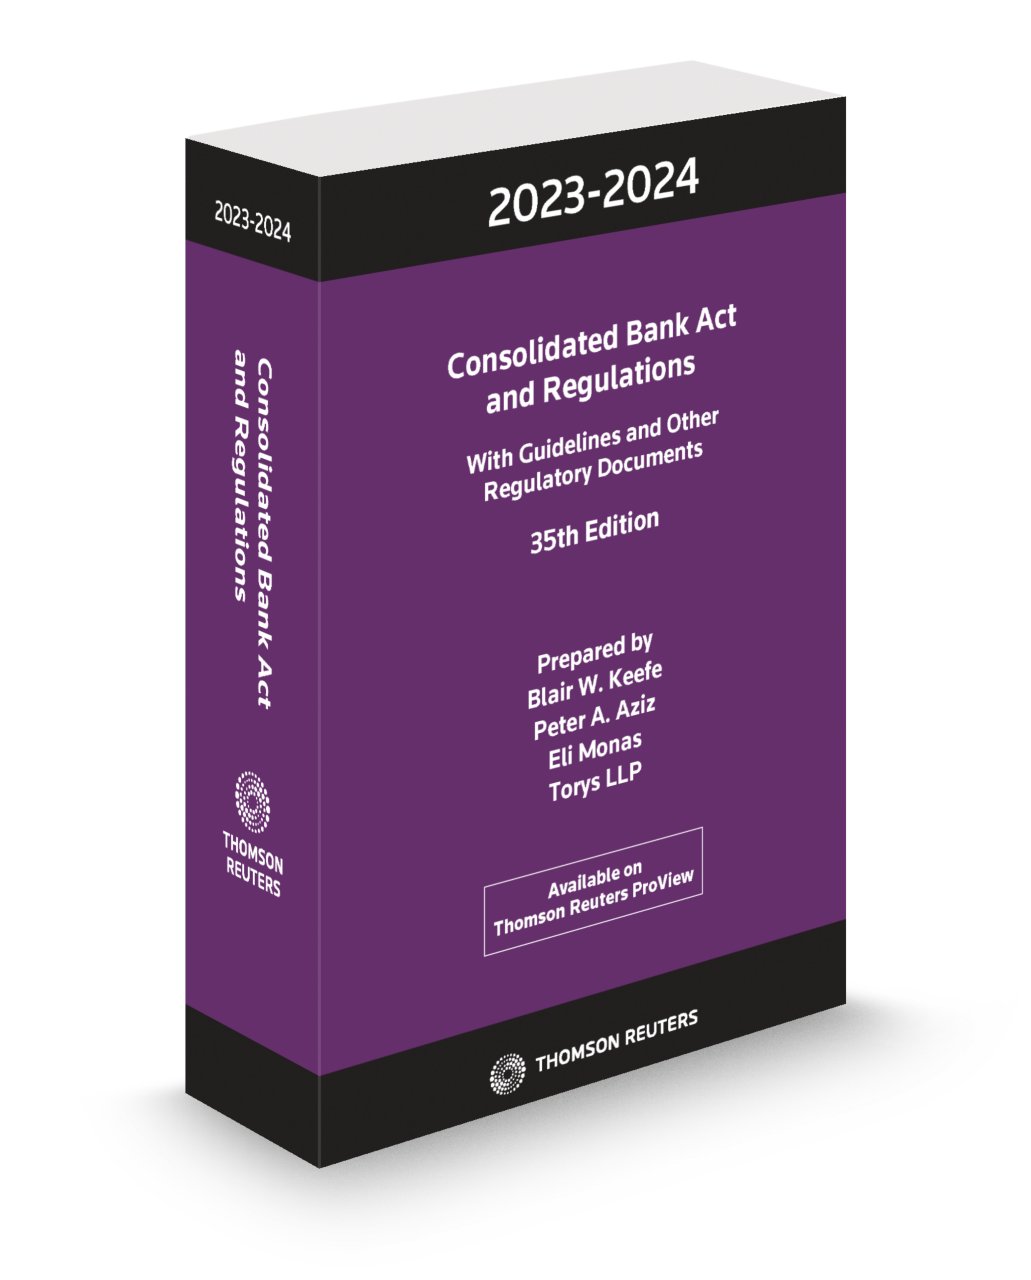 Cover of Consolidated Bank Act and Regulations 2023-2024, 35th Edition